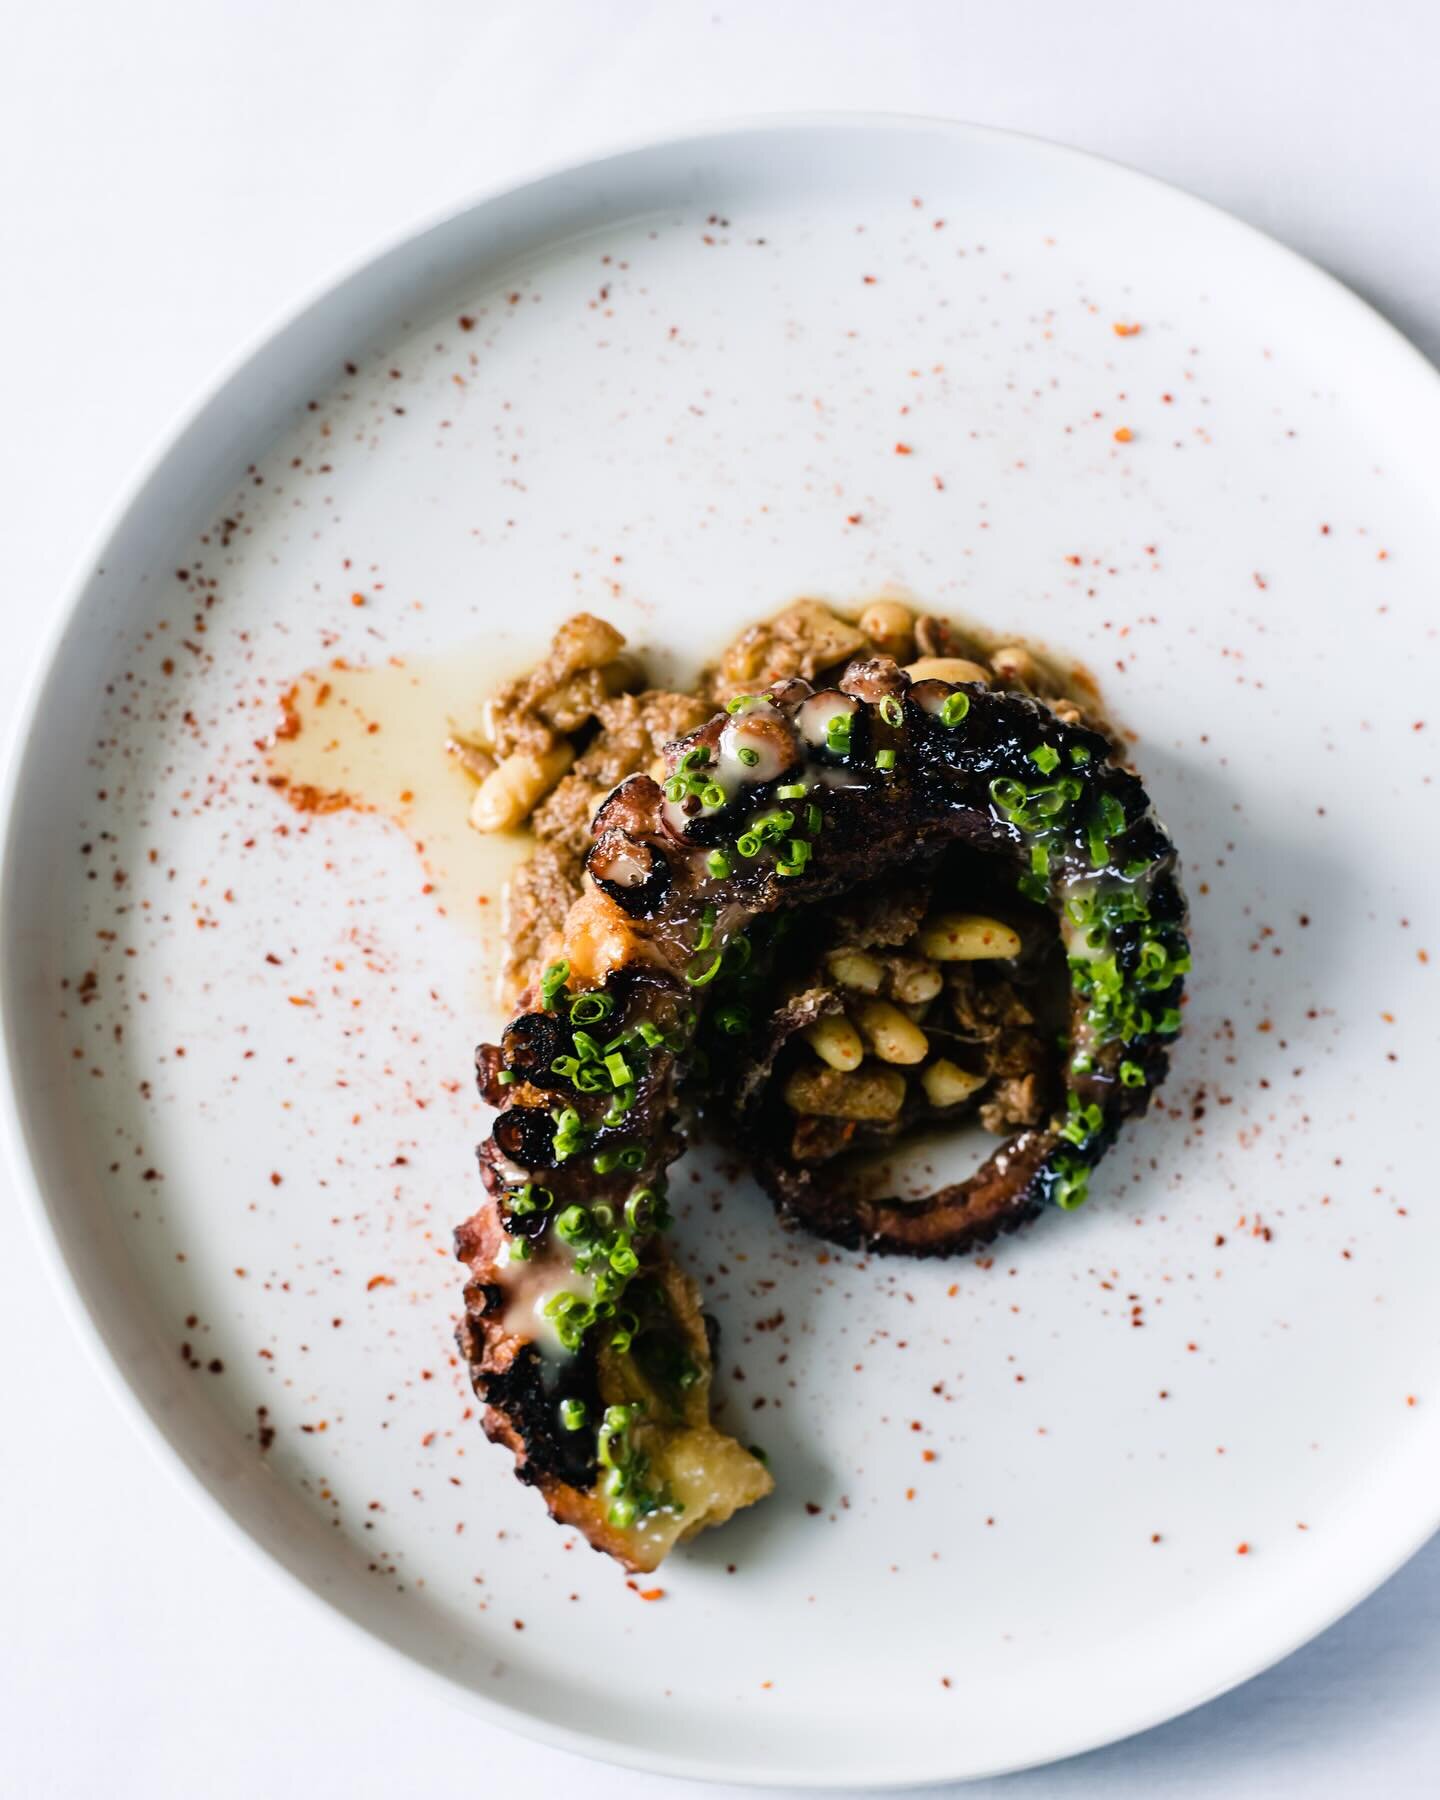 One of our favorites&hellip; octopus is always a win when it&rsquo;s done right! Togarashi Mayo and gigandes beans for the win. Bet you didn&rsquo;t have this on your thanksgiving spread!